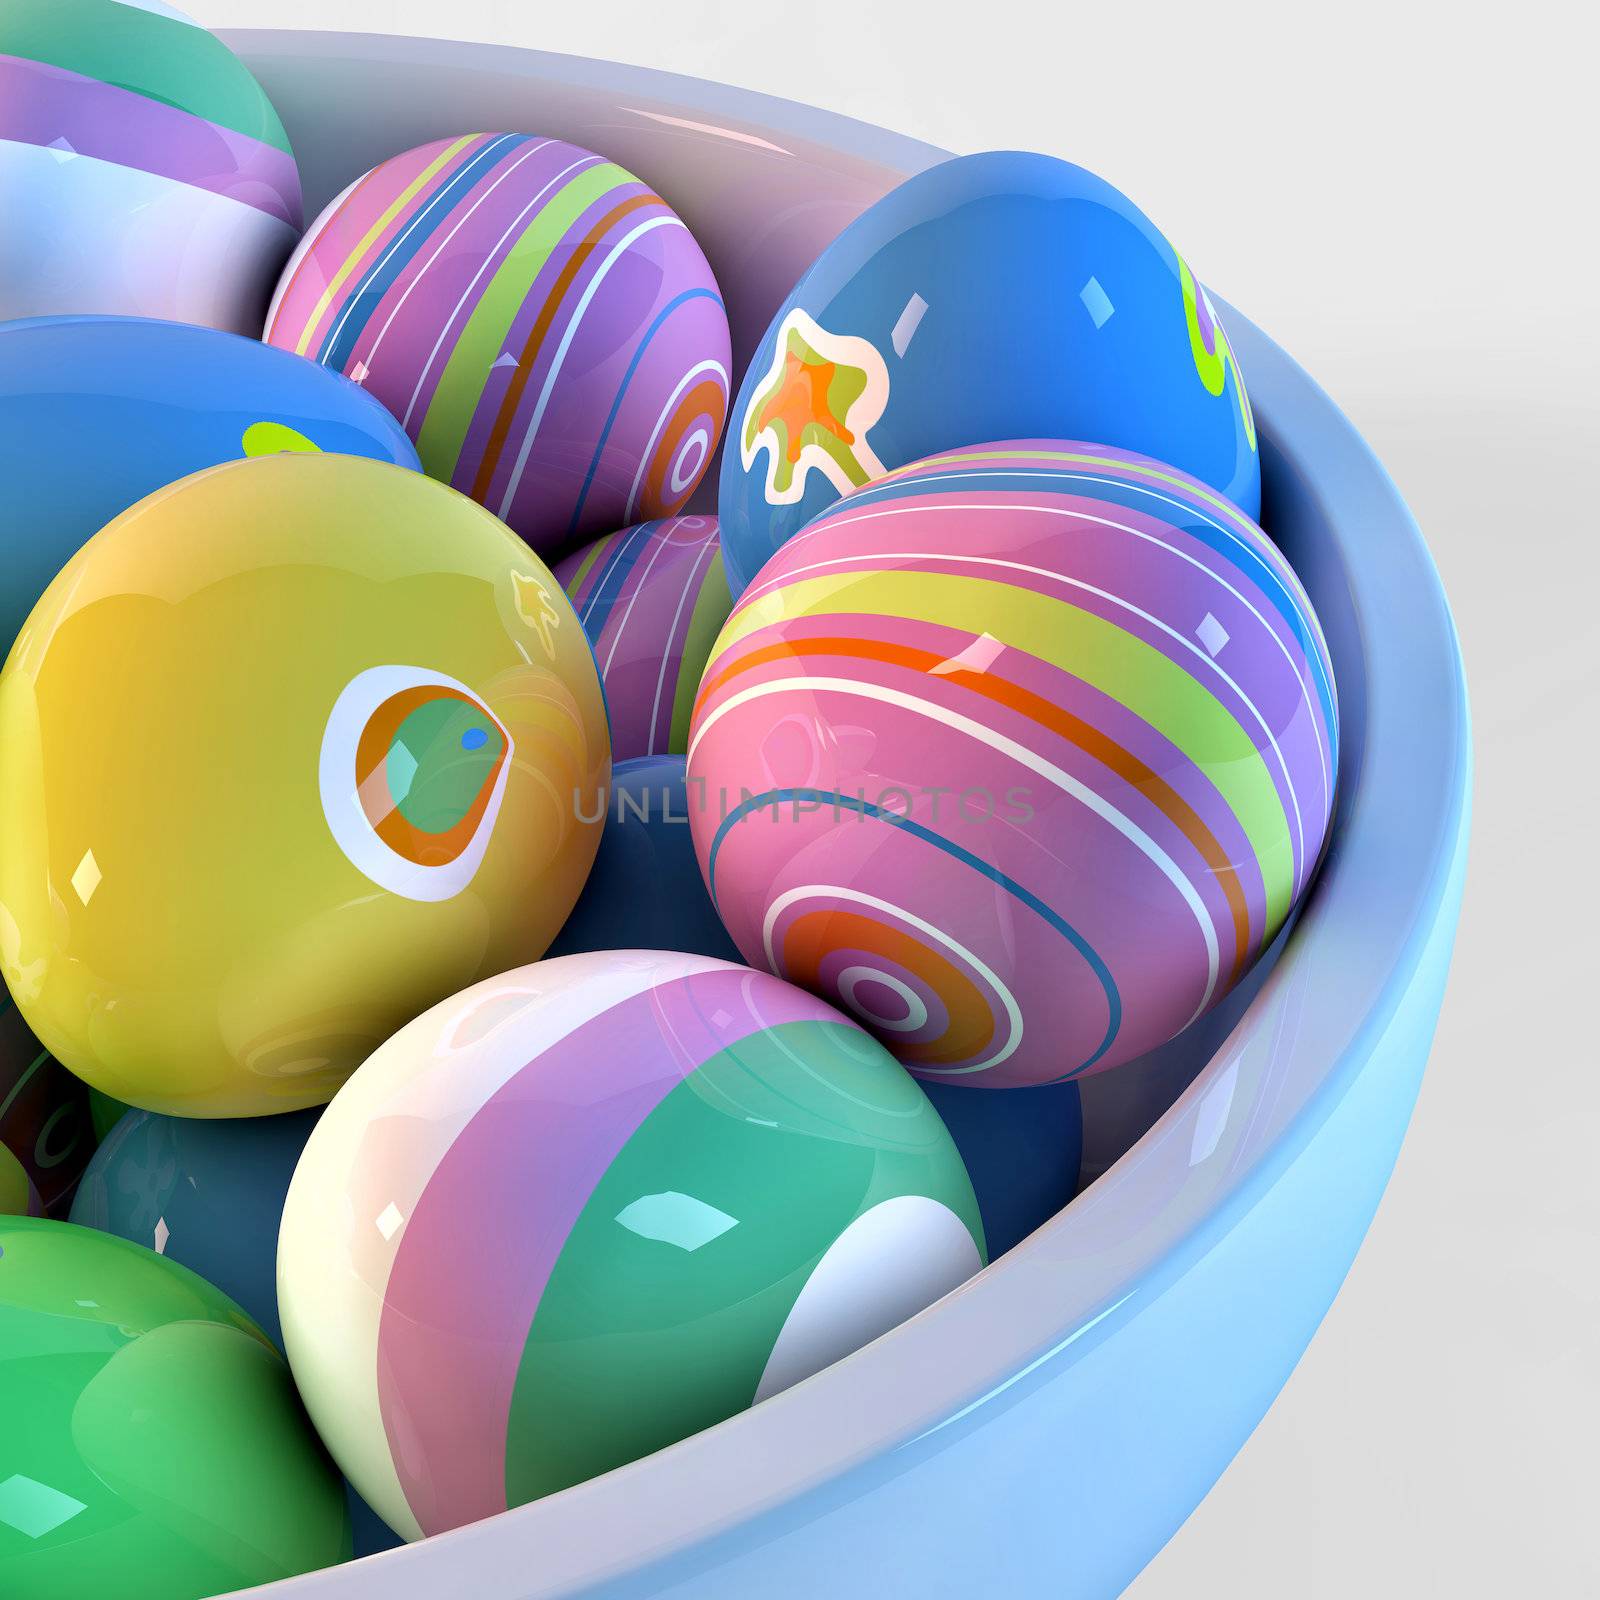 Bowl filled with easter eggs by dynamicfoto